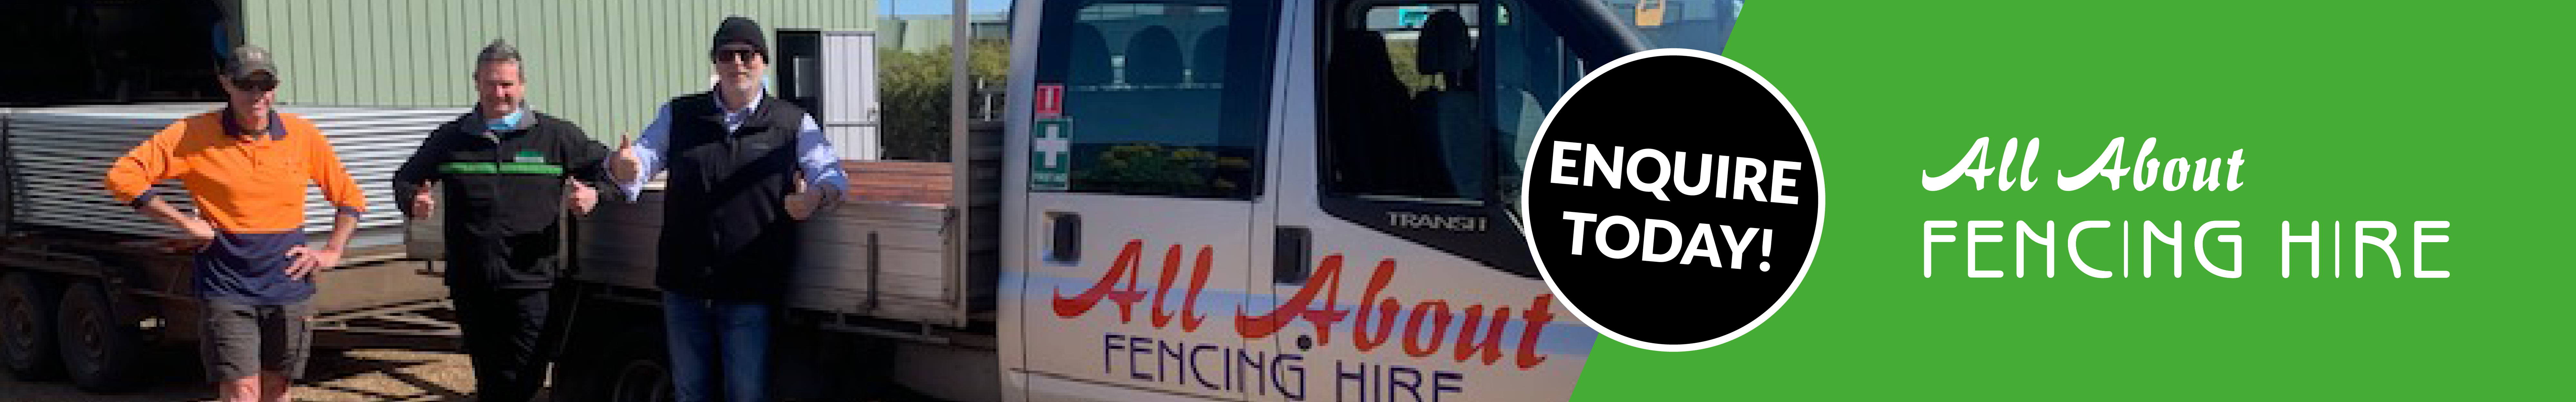 All About Fencing Hire